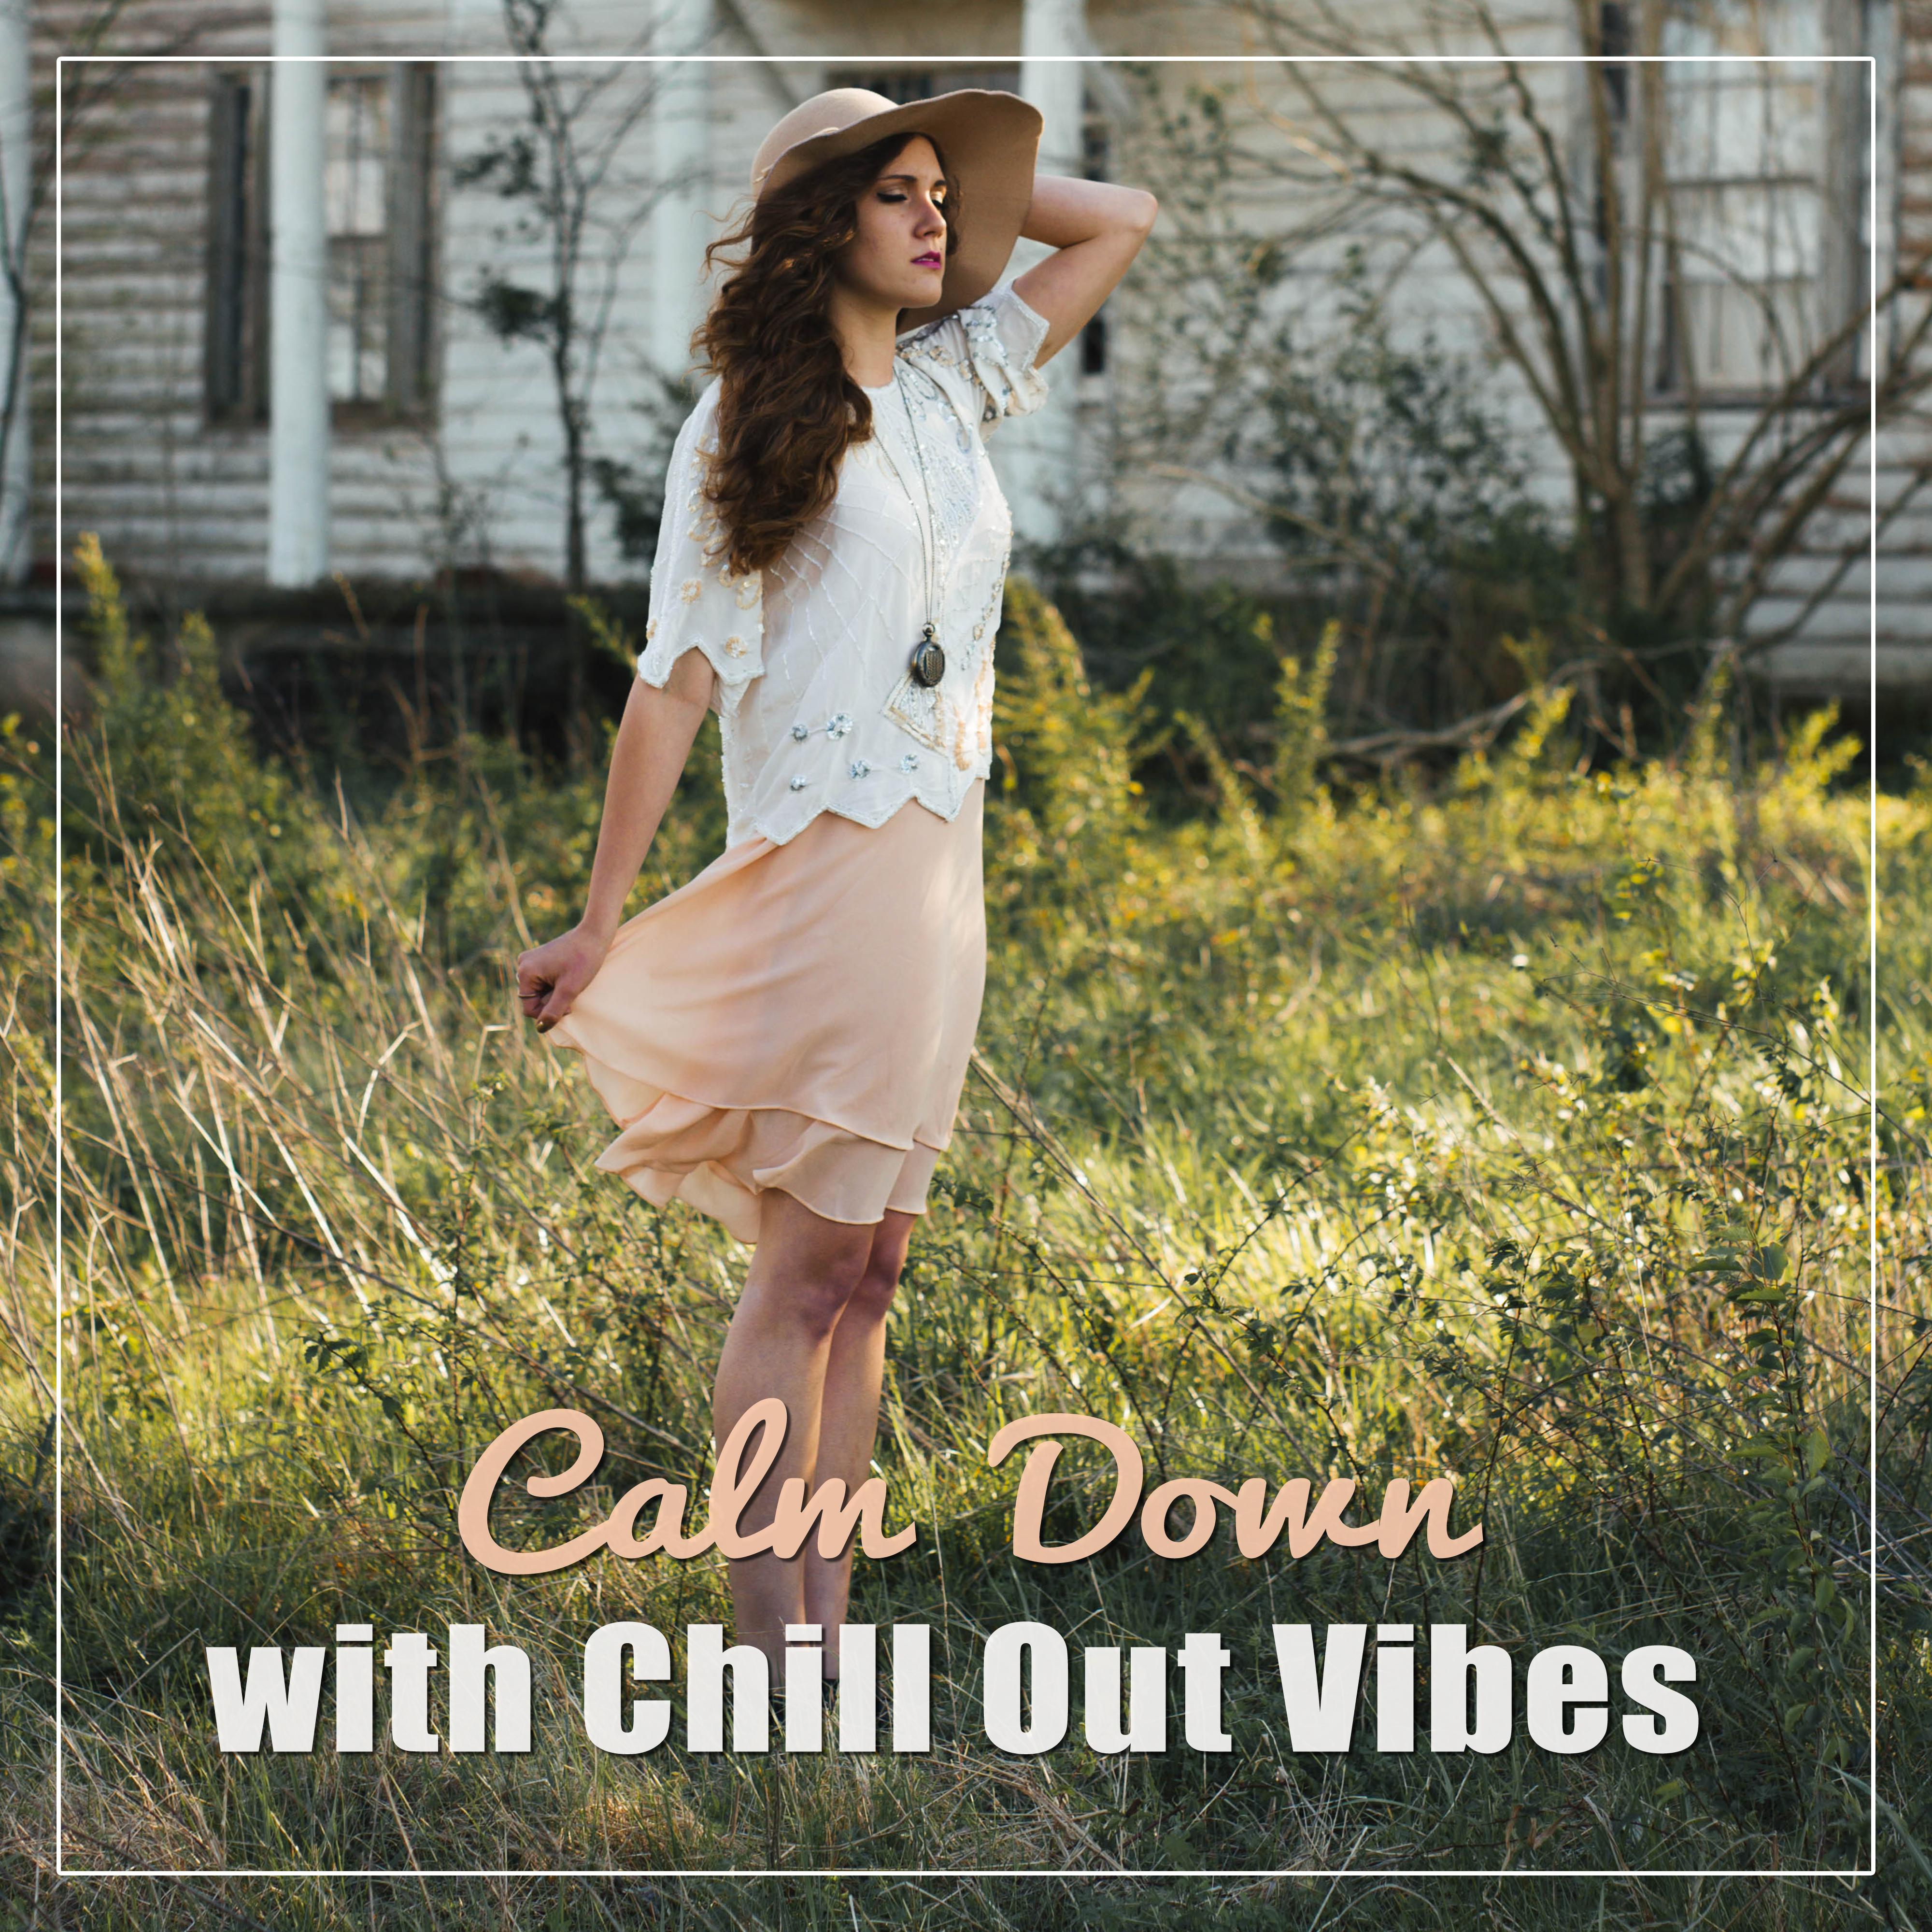 Calm Down with Chill Out Vibes – Rest with Chill Out, Peaceful Mind, Tropical Relaxation, Stress Relief, Inner Silence